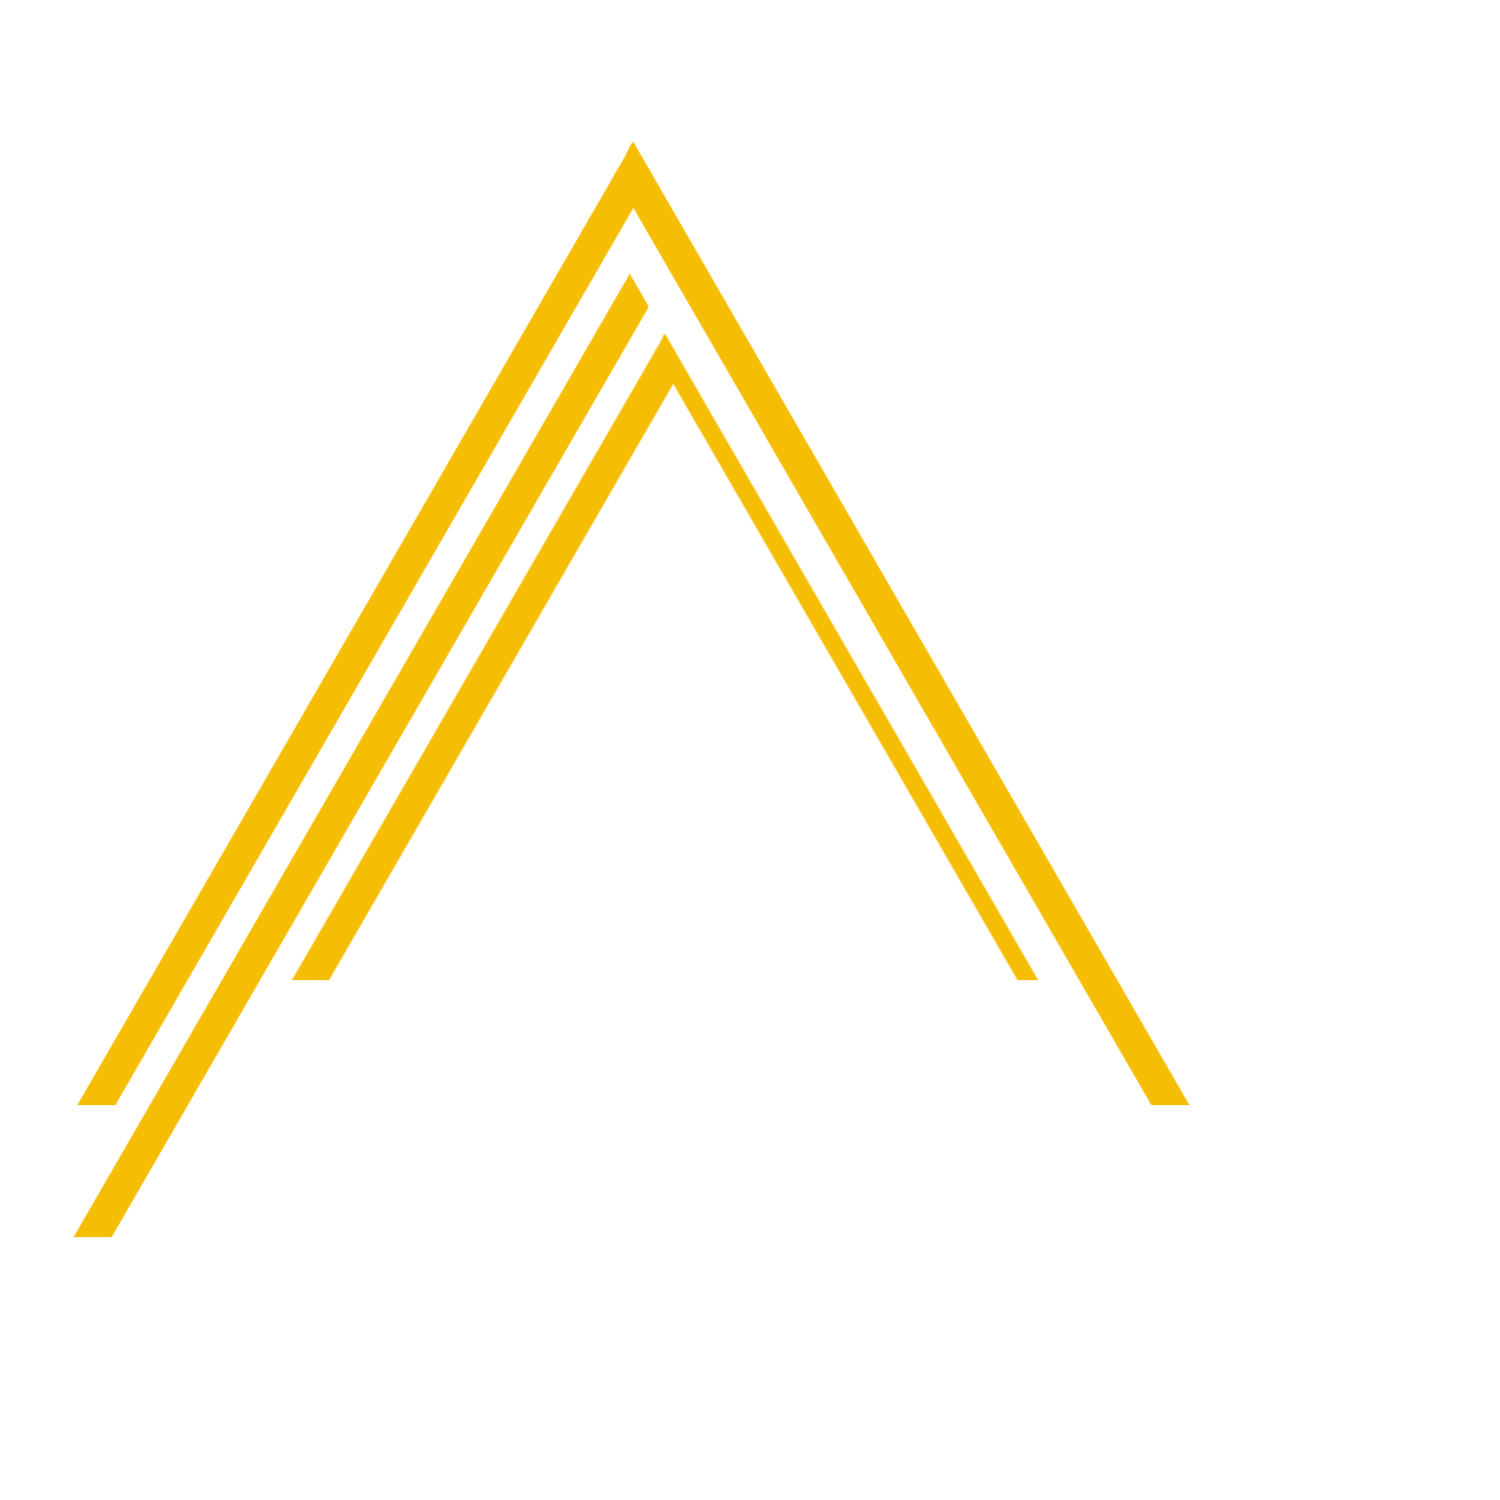 Affordable Claim Solutions